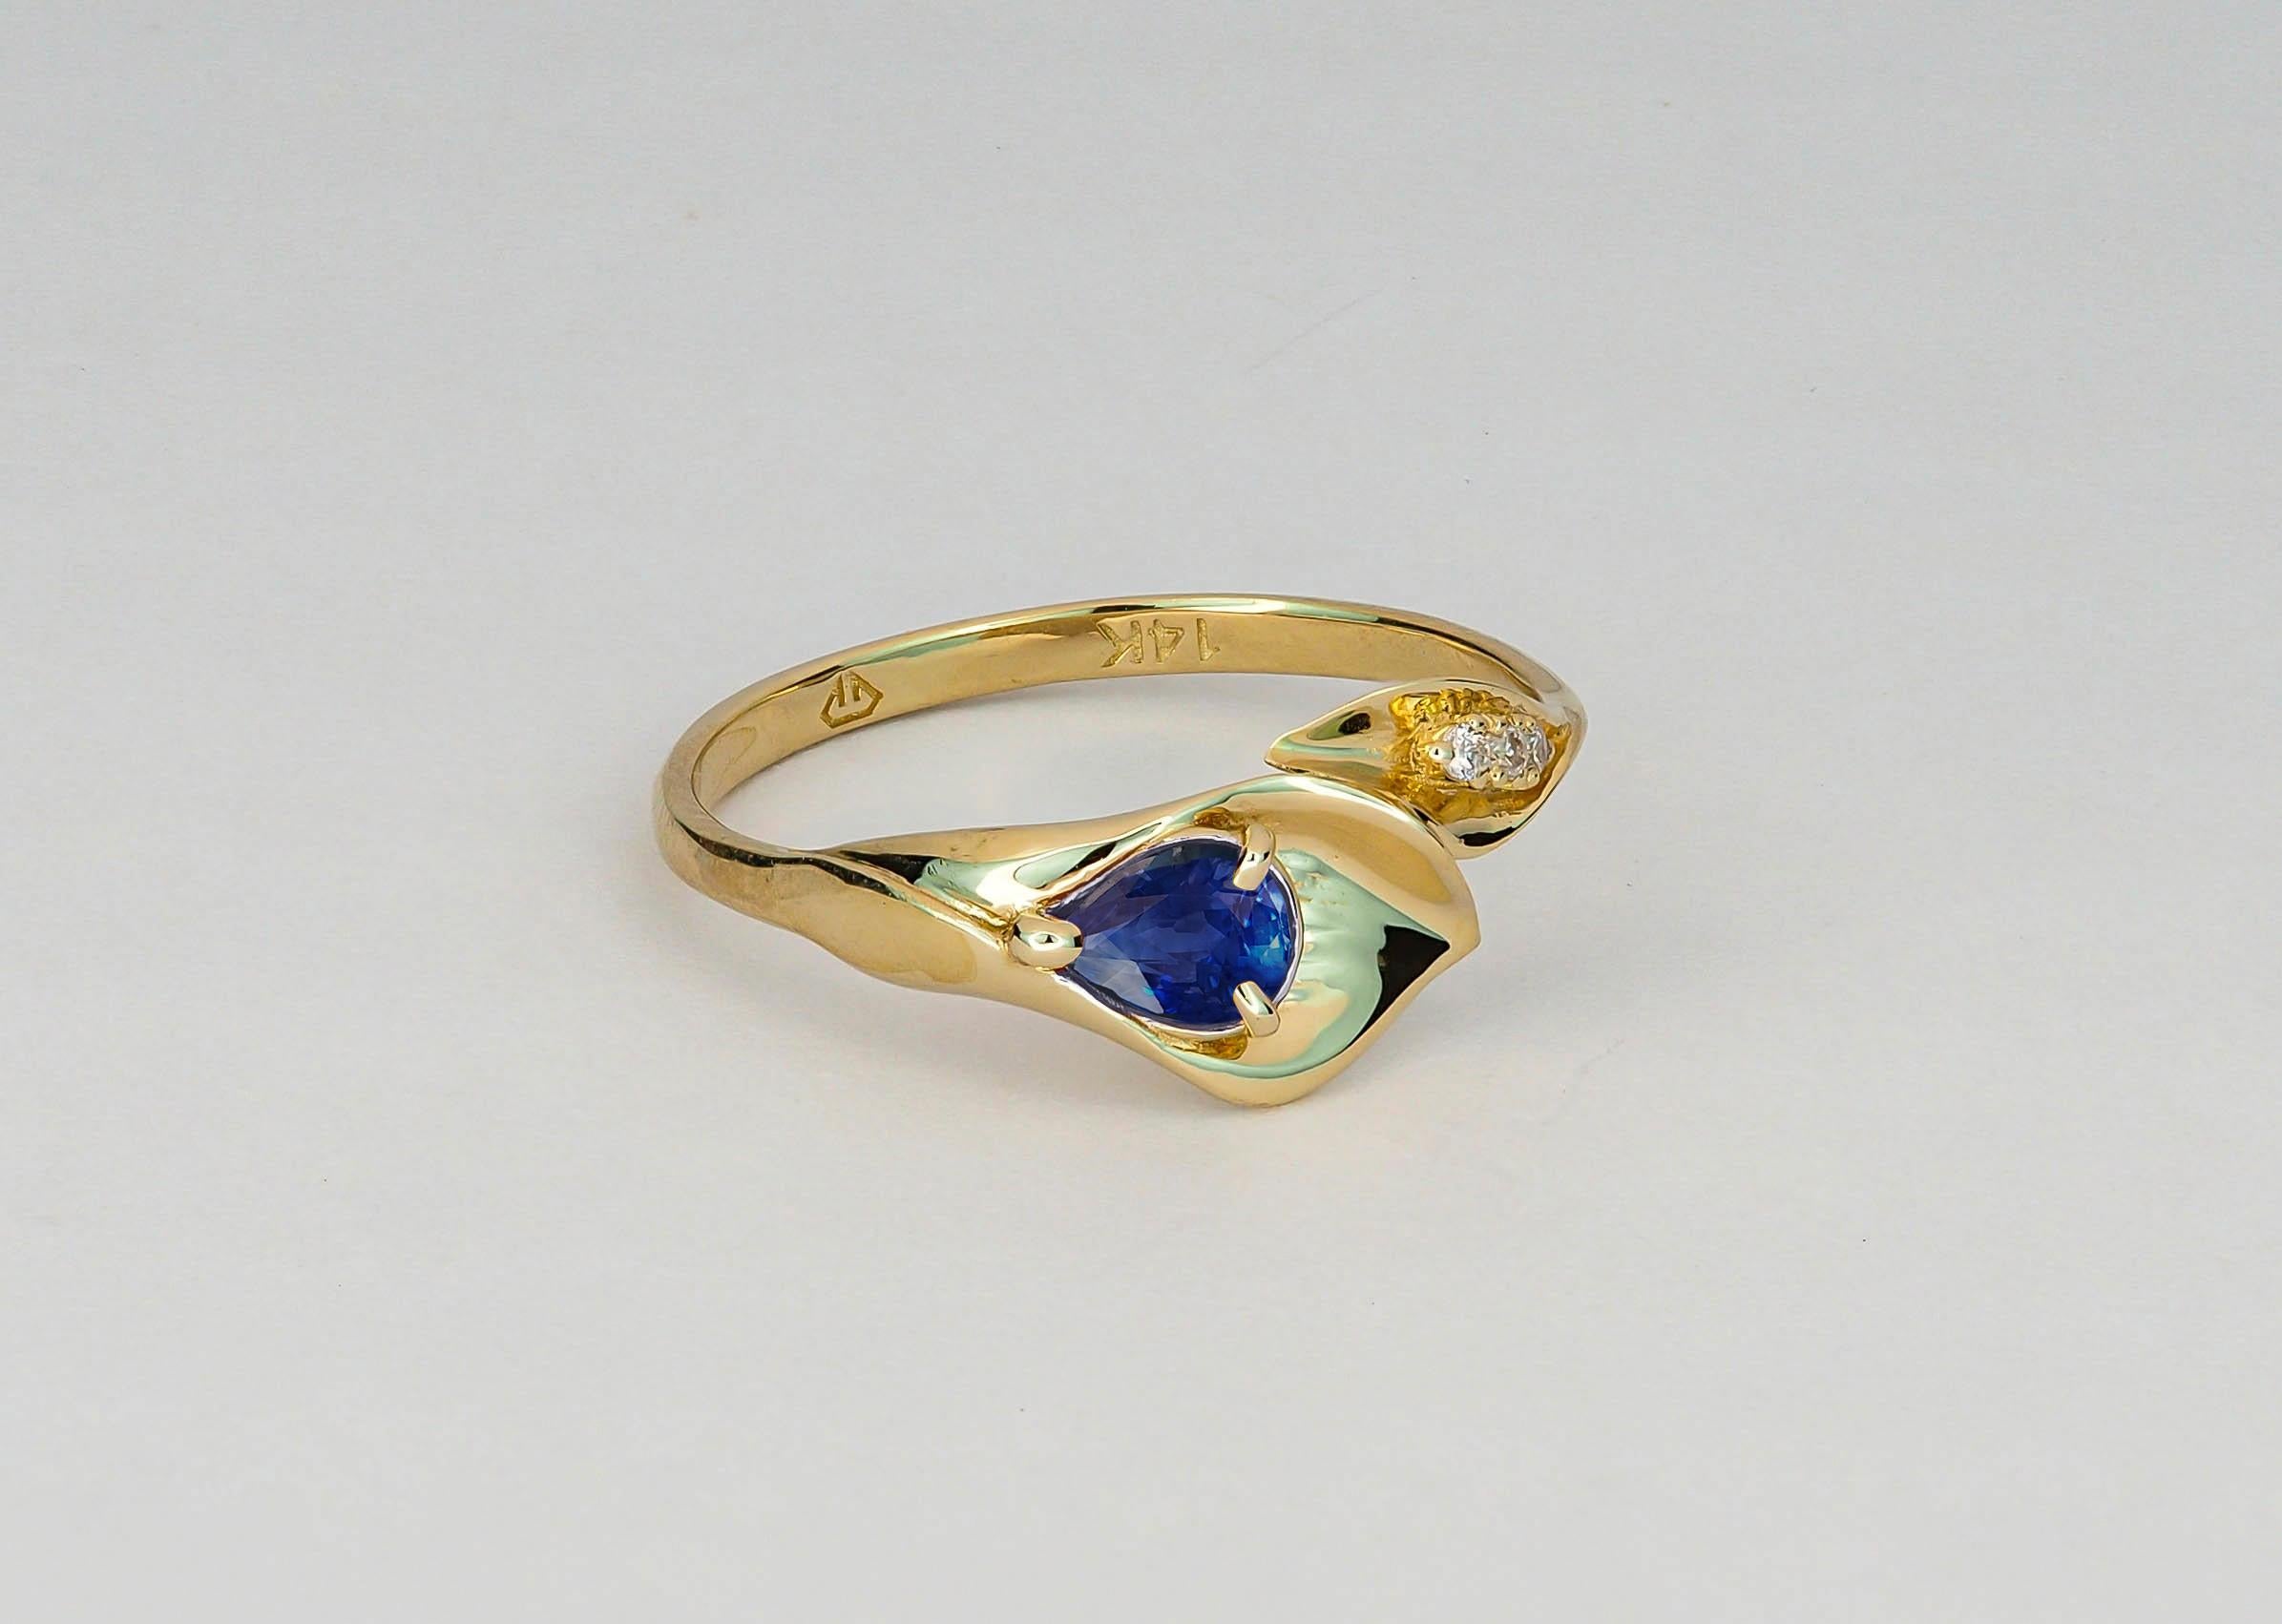 For Sale:  Lily Calla Gold Ring, 14 Karat Gold Ring with Sapphire and Diamonds 2